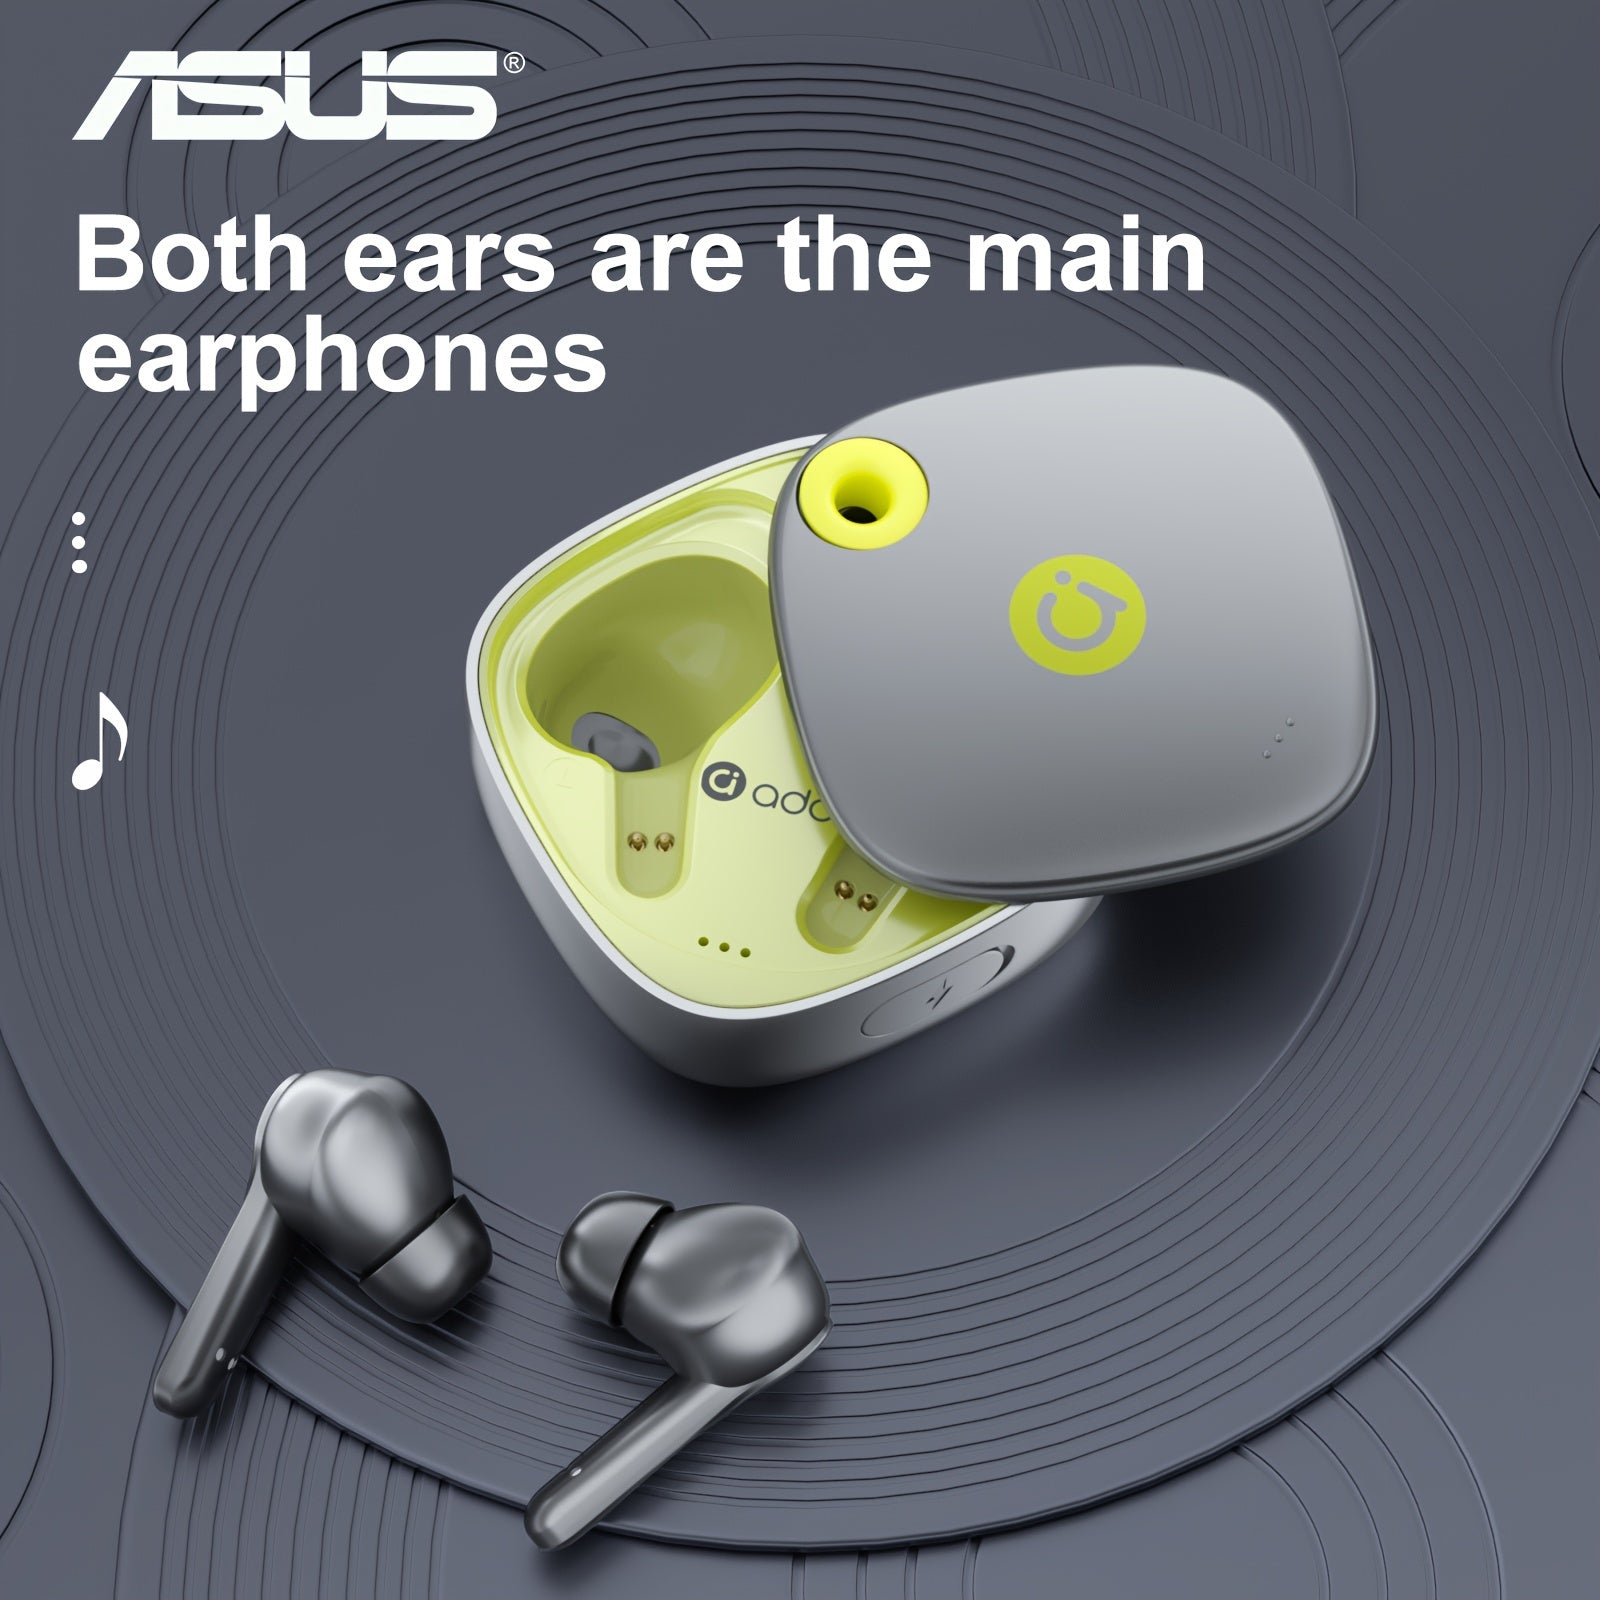 Asus wireless headphones carry a microphone with lossless sound quality